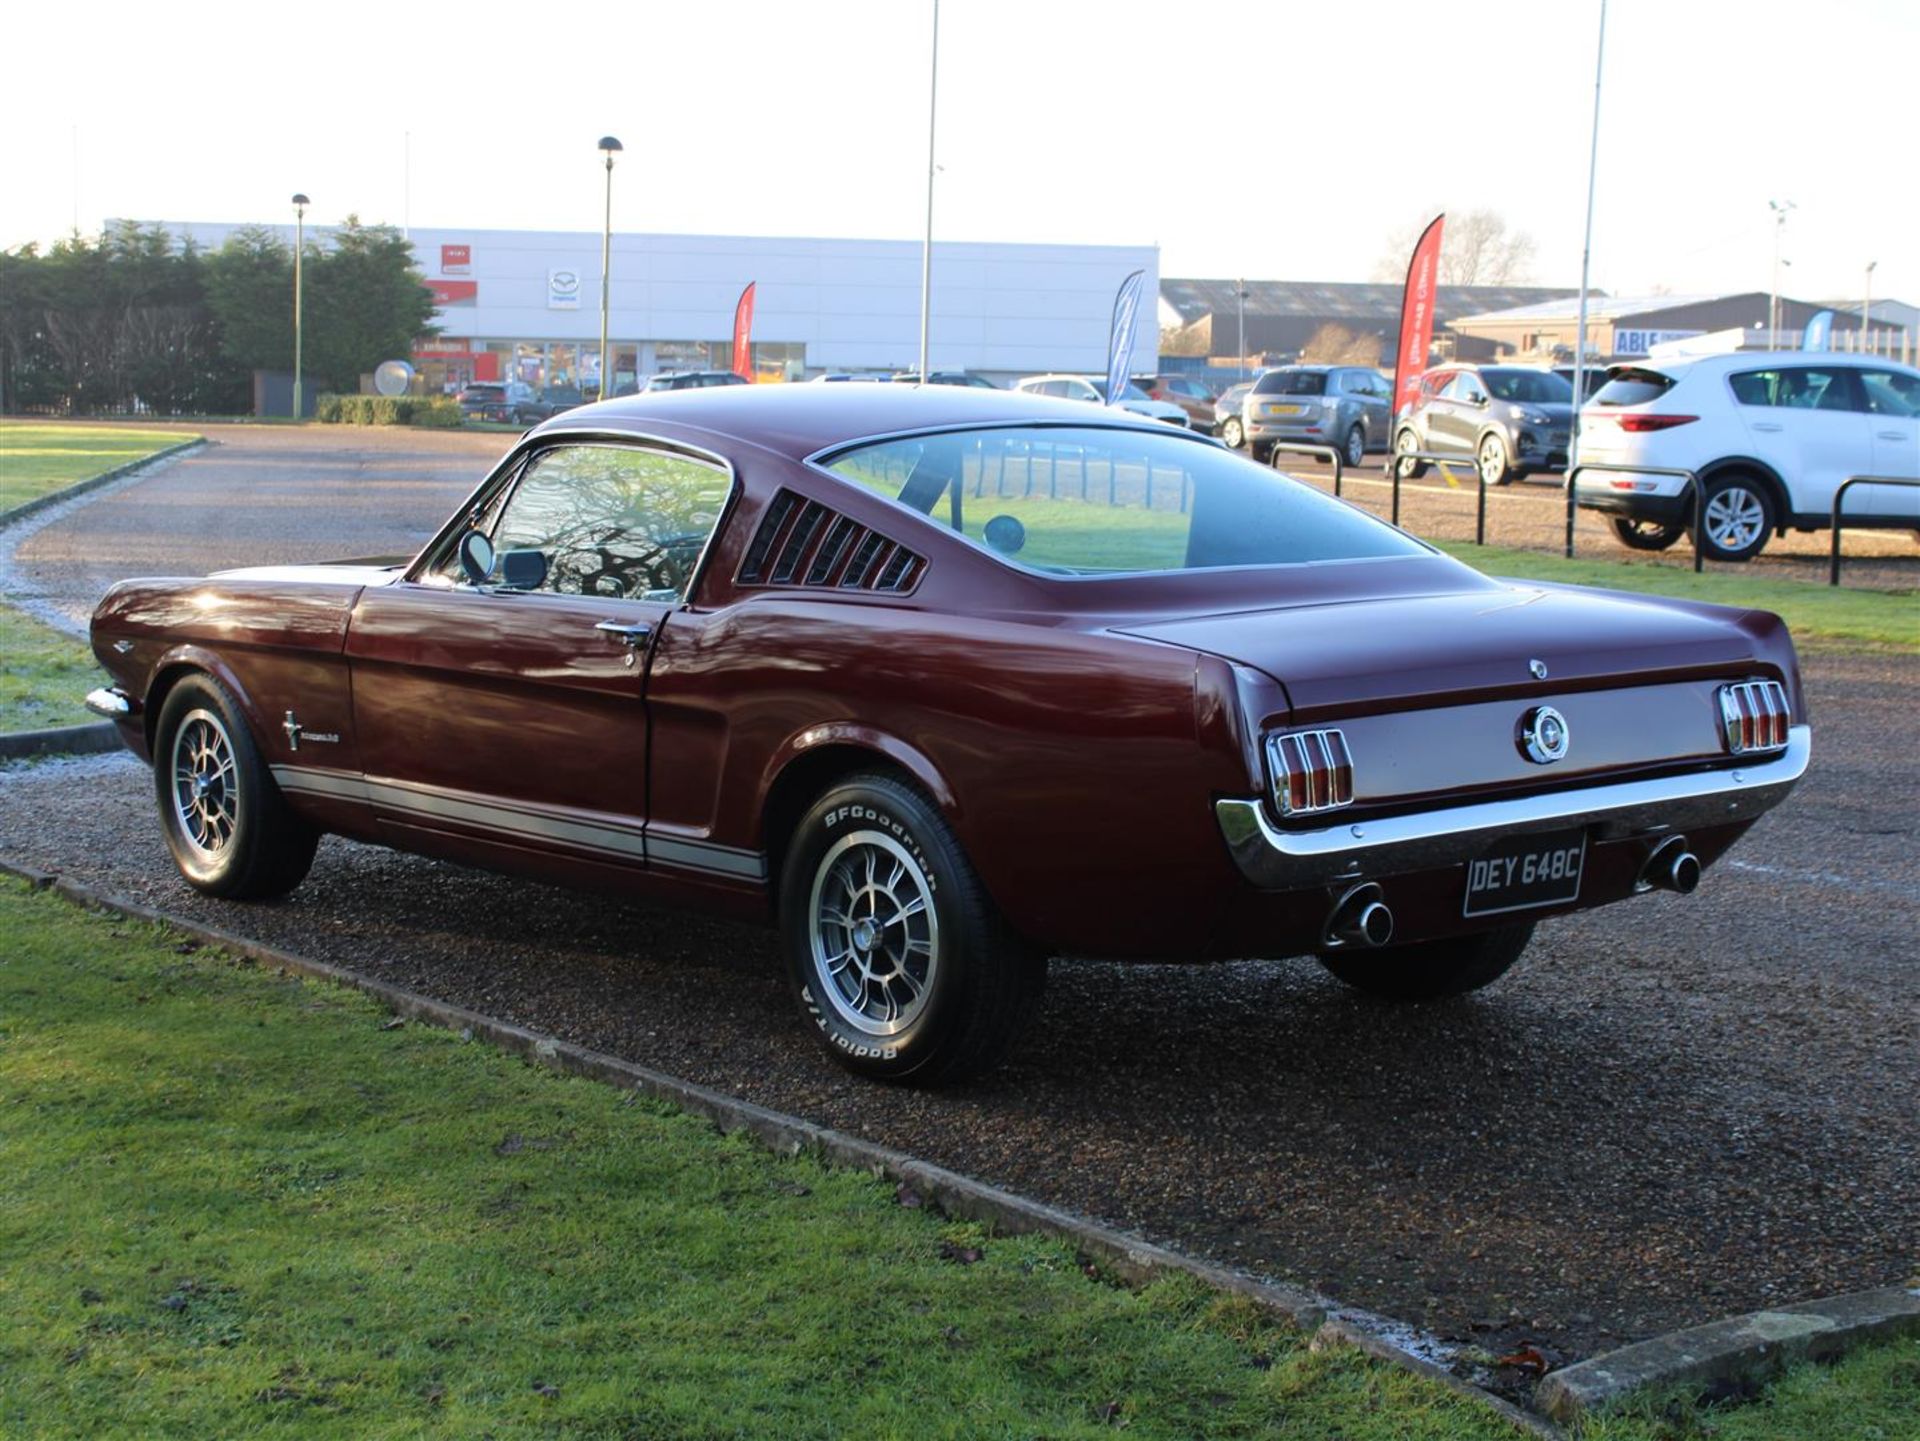 1965 Ford Mustang 5.0 V8 Fastback Auto LHD - Image 4 of 21